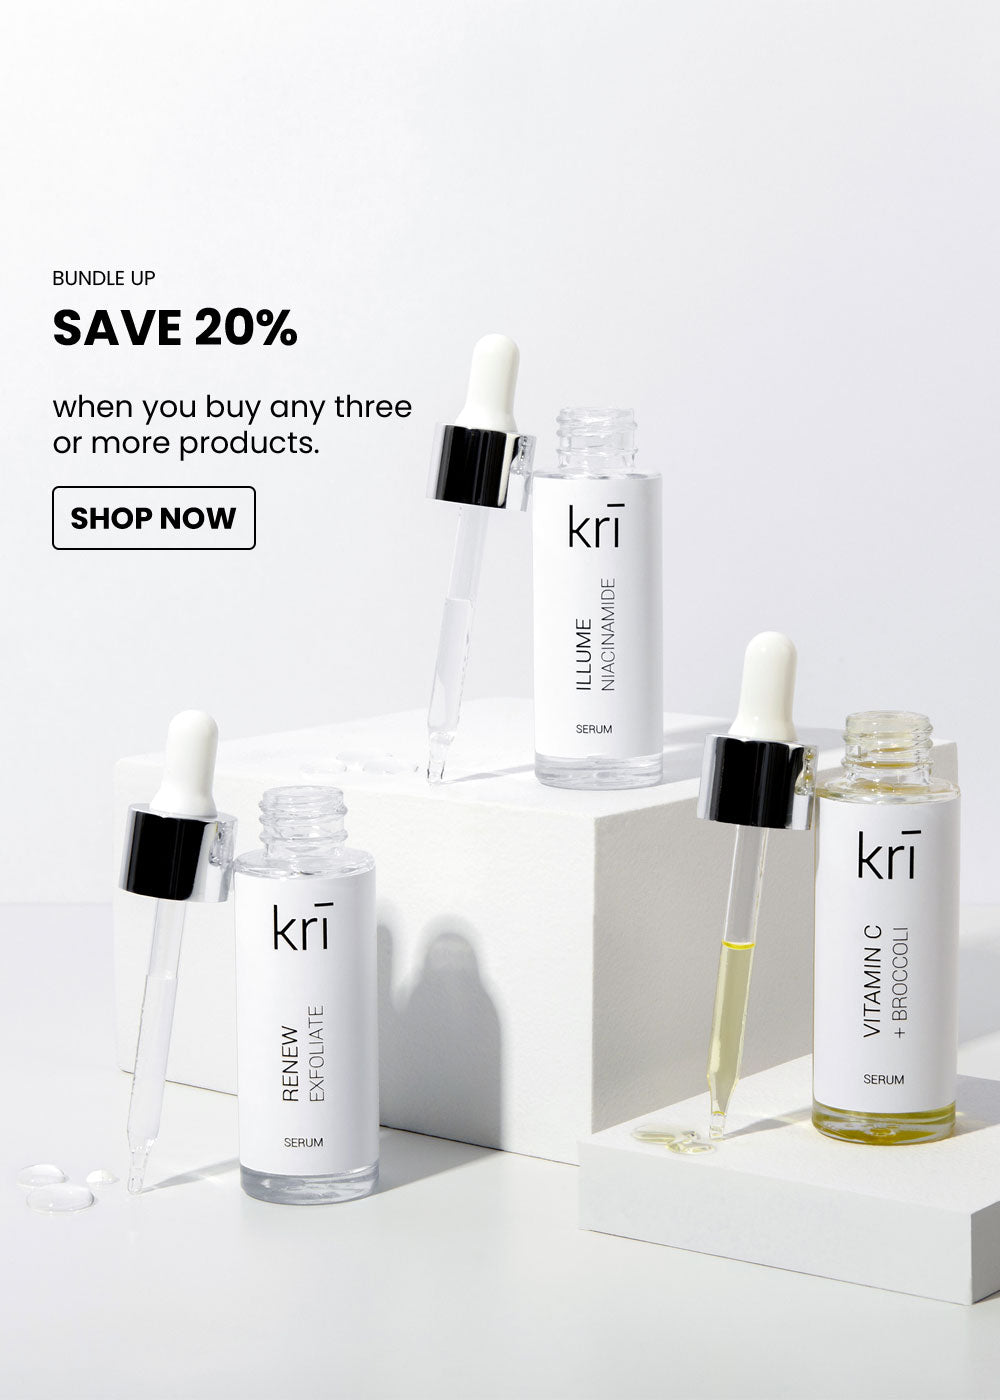 Save 20% when you buy any three or more Kri Skincare products